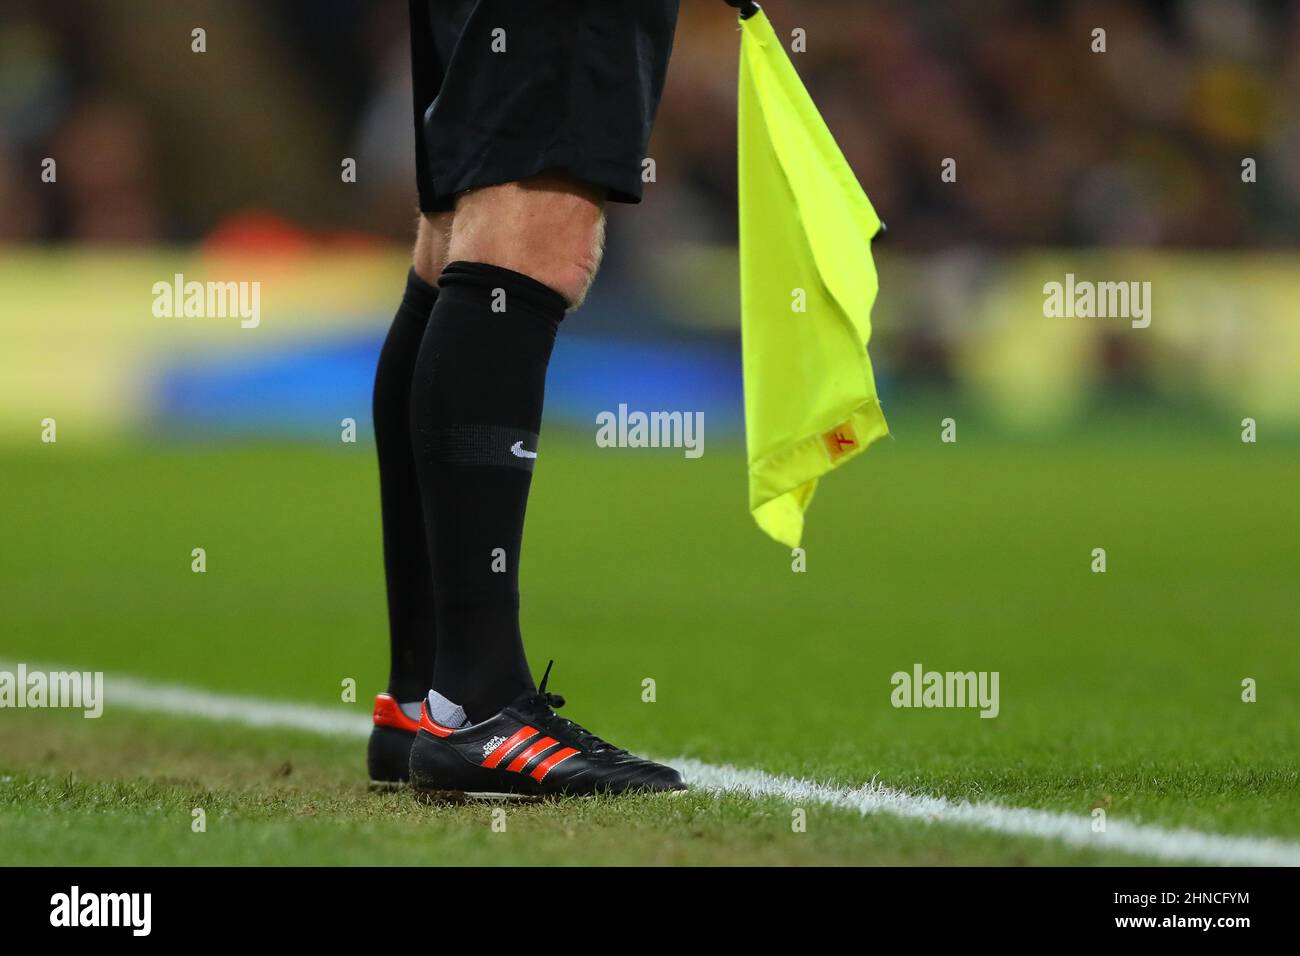 Adidas Orange Striped Copa Mundial boot worn by The RefereeÕs Assistant -  Norwich City v Manchester City,